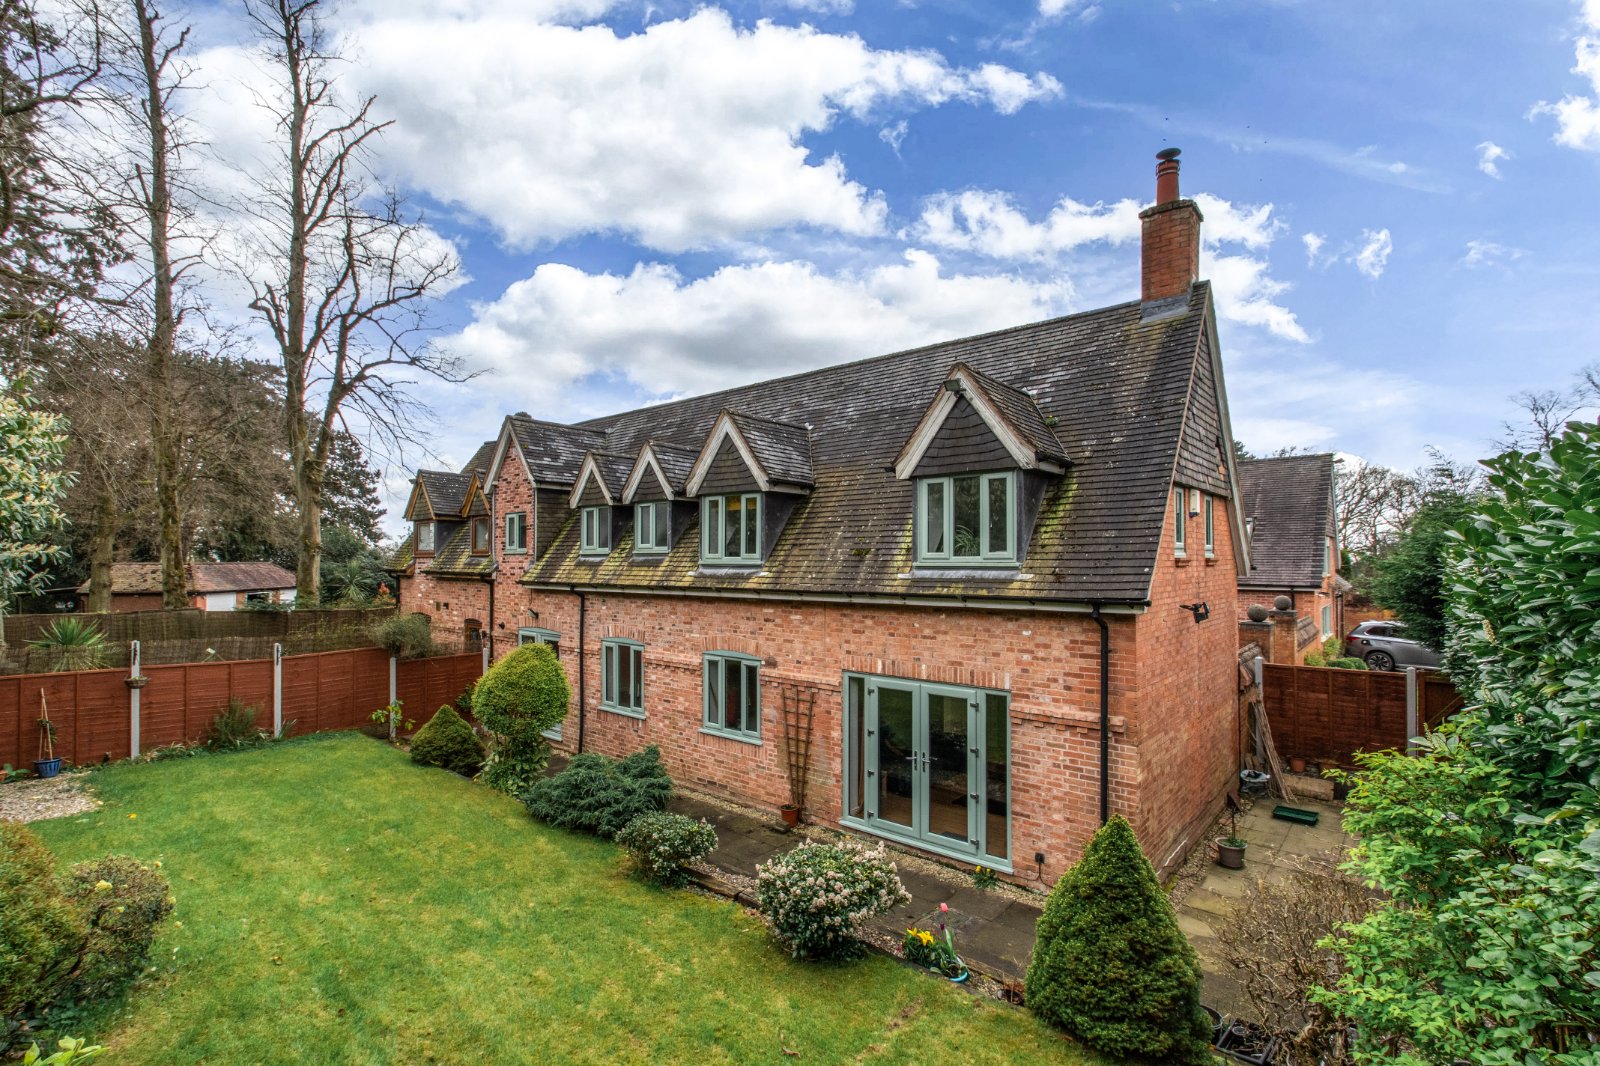 4 bed  for sale in Linthurst Road, Barnt Green  - Property Image 13